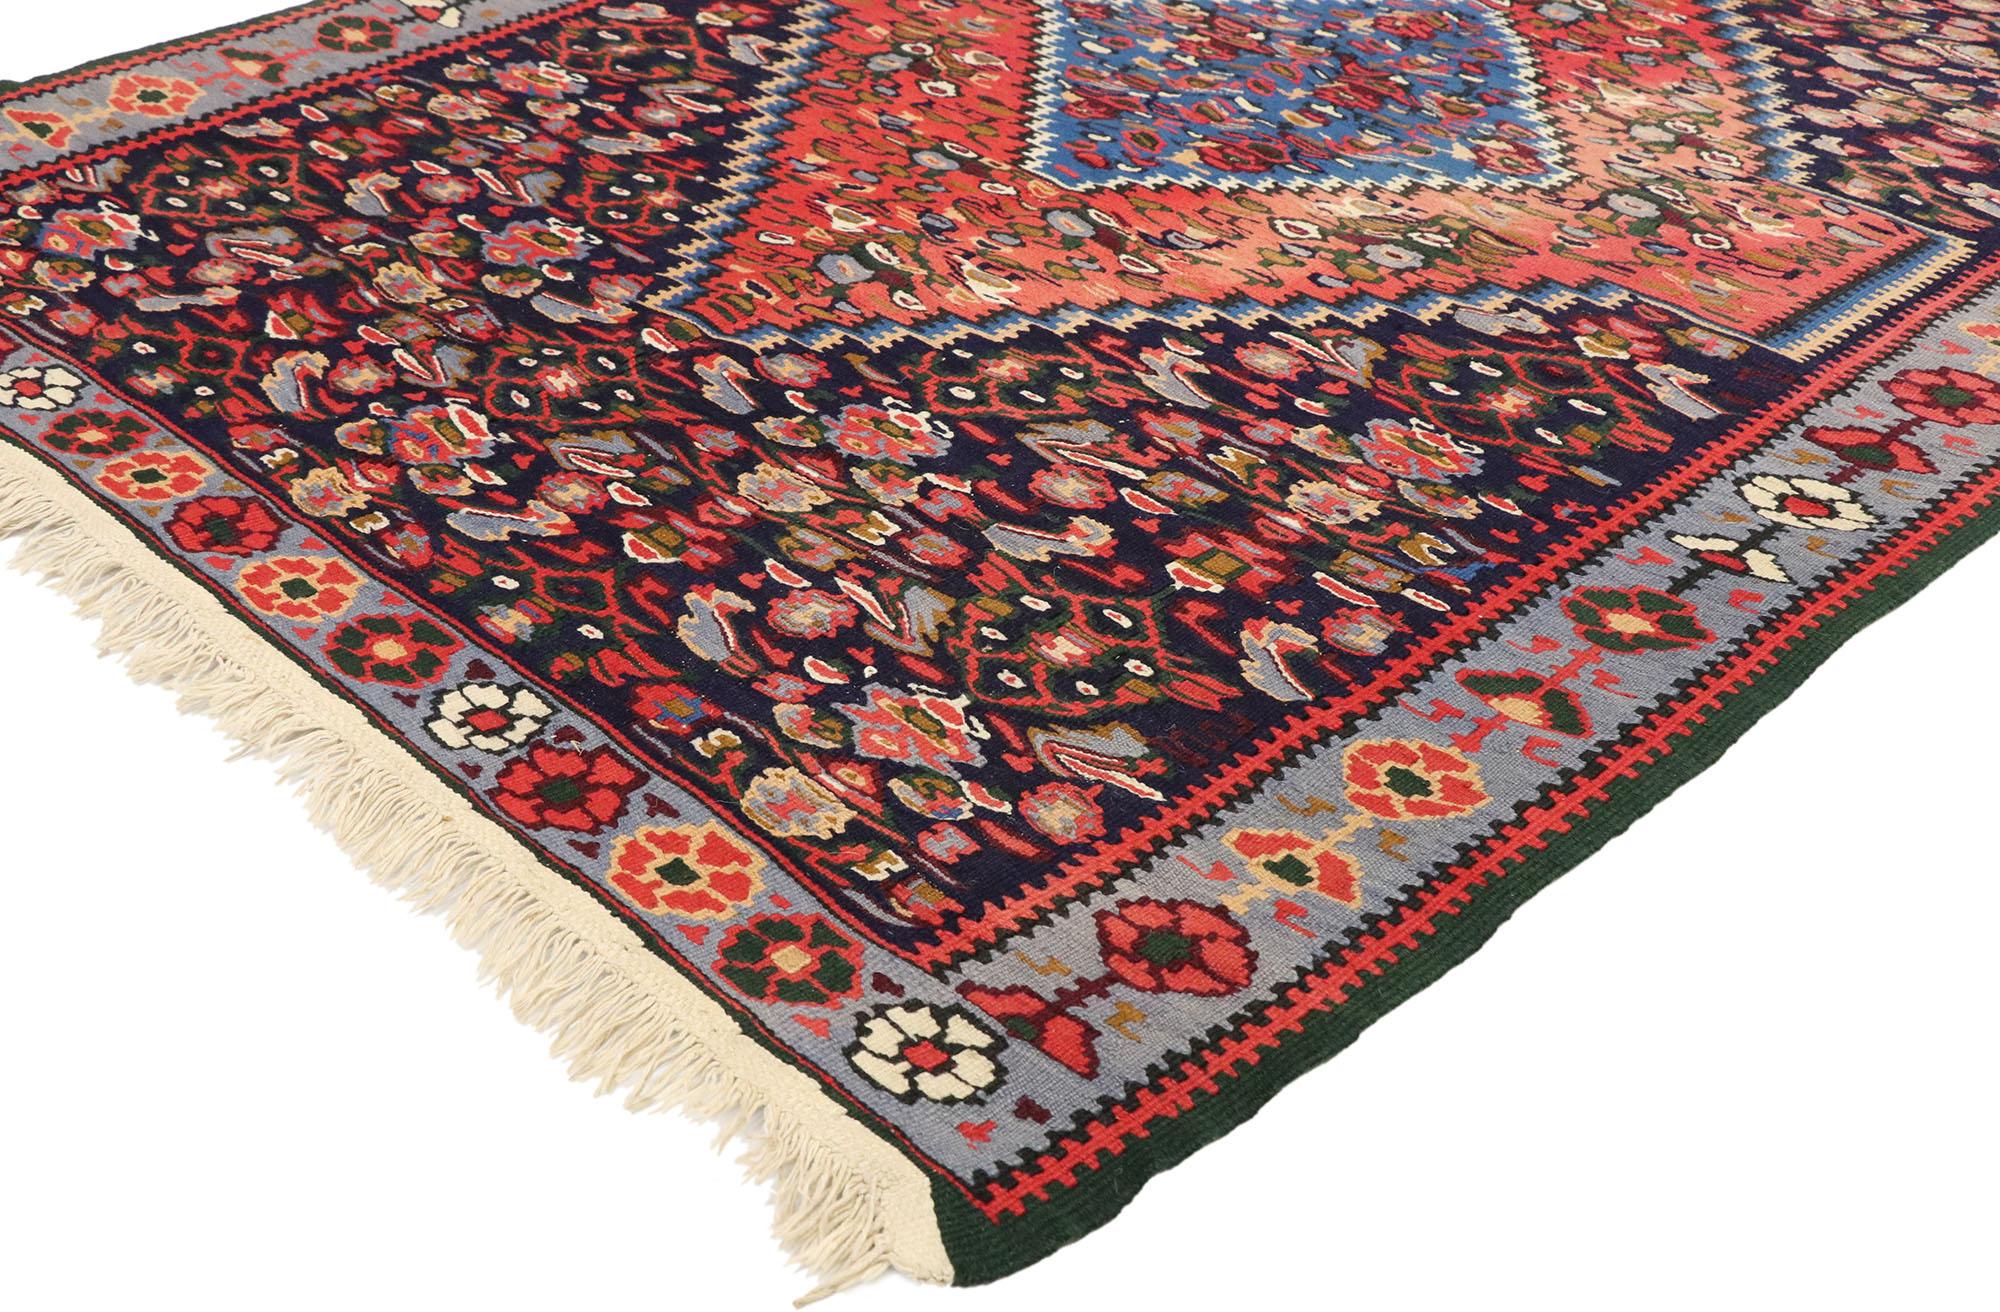 70215, vintage Persian Bijar Accent rug with traditional style, entry or foyer rug. This hand-knotted wool vintage Persian Bijar accent rug with traditional style is like a glimmering jewel, adding sparkle and panache to nearly any interior it